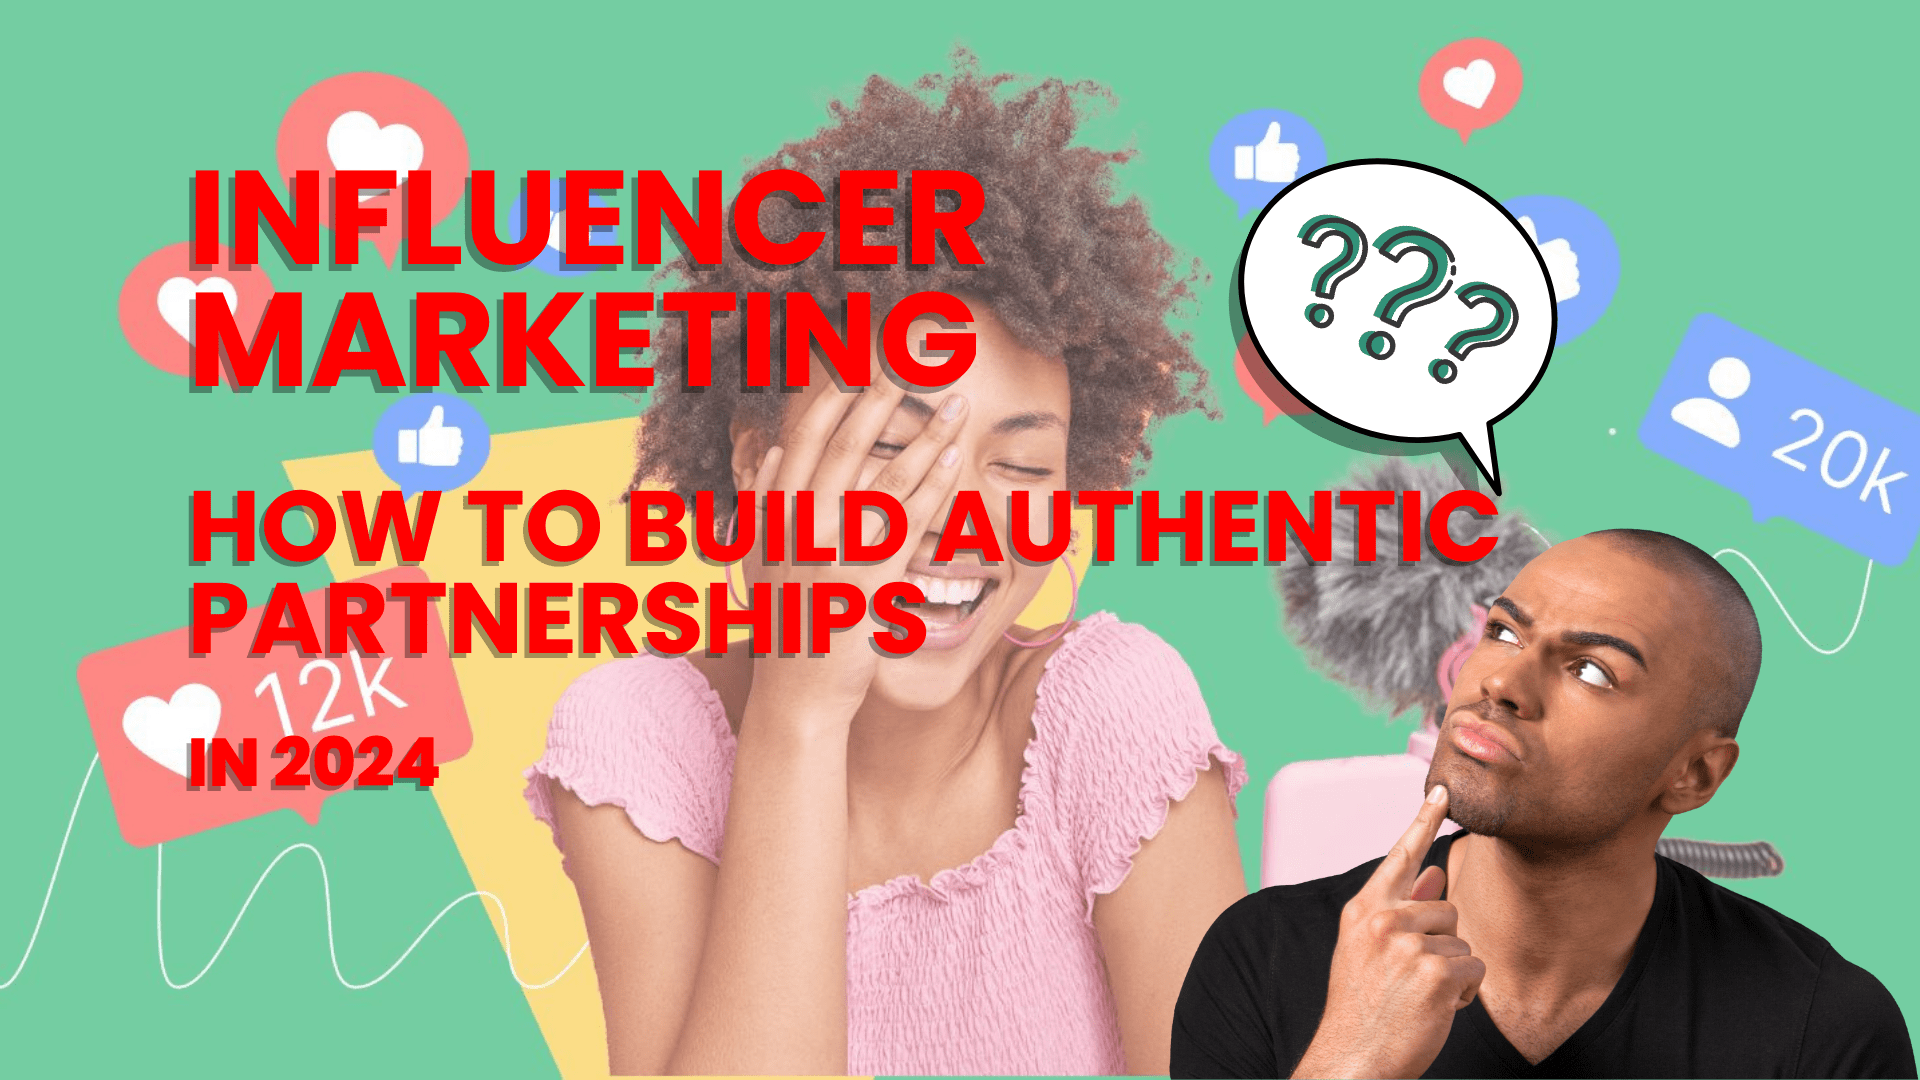 Influencer Marketing: How to build Authentic Partnerships